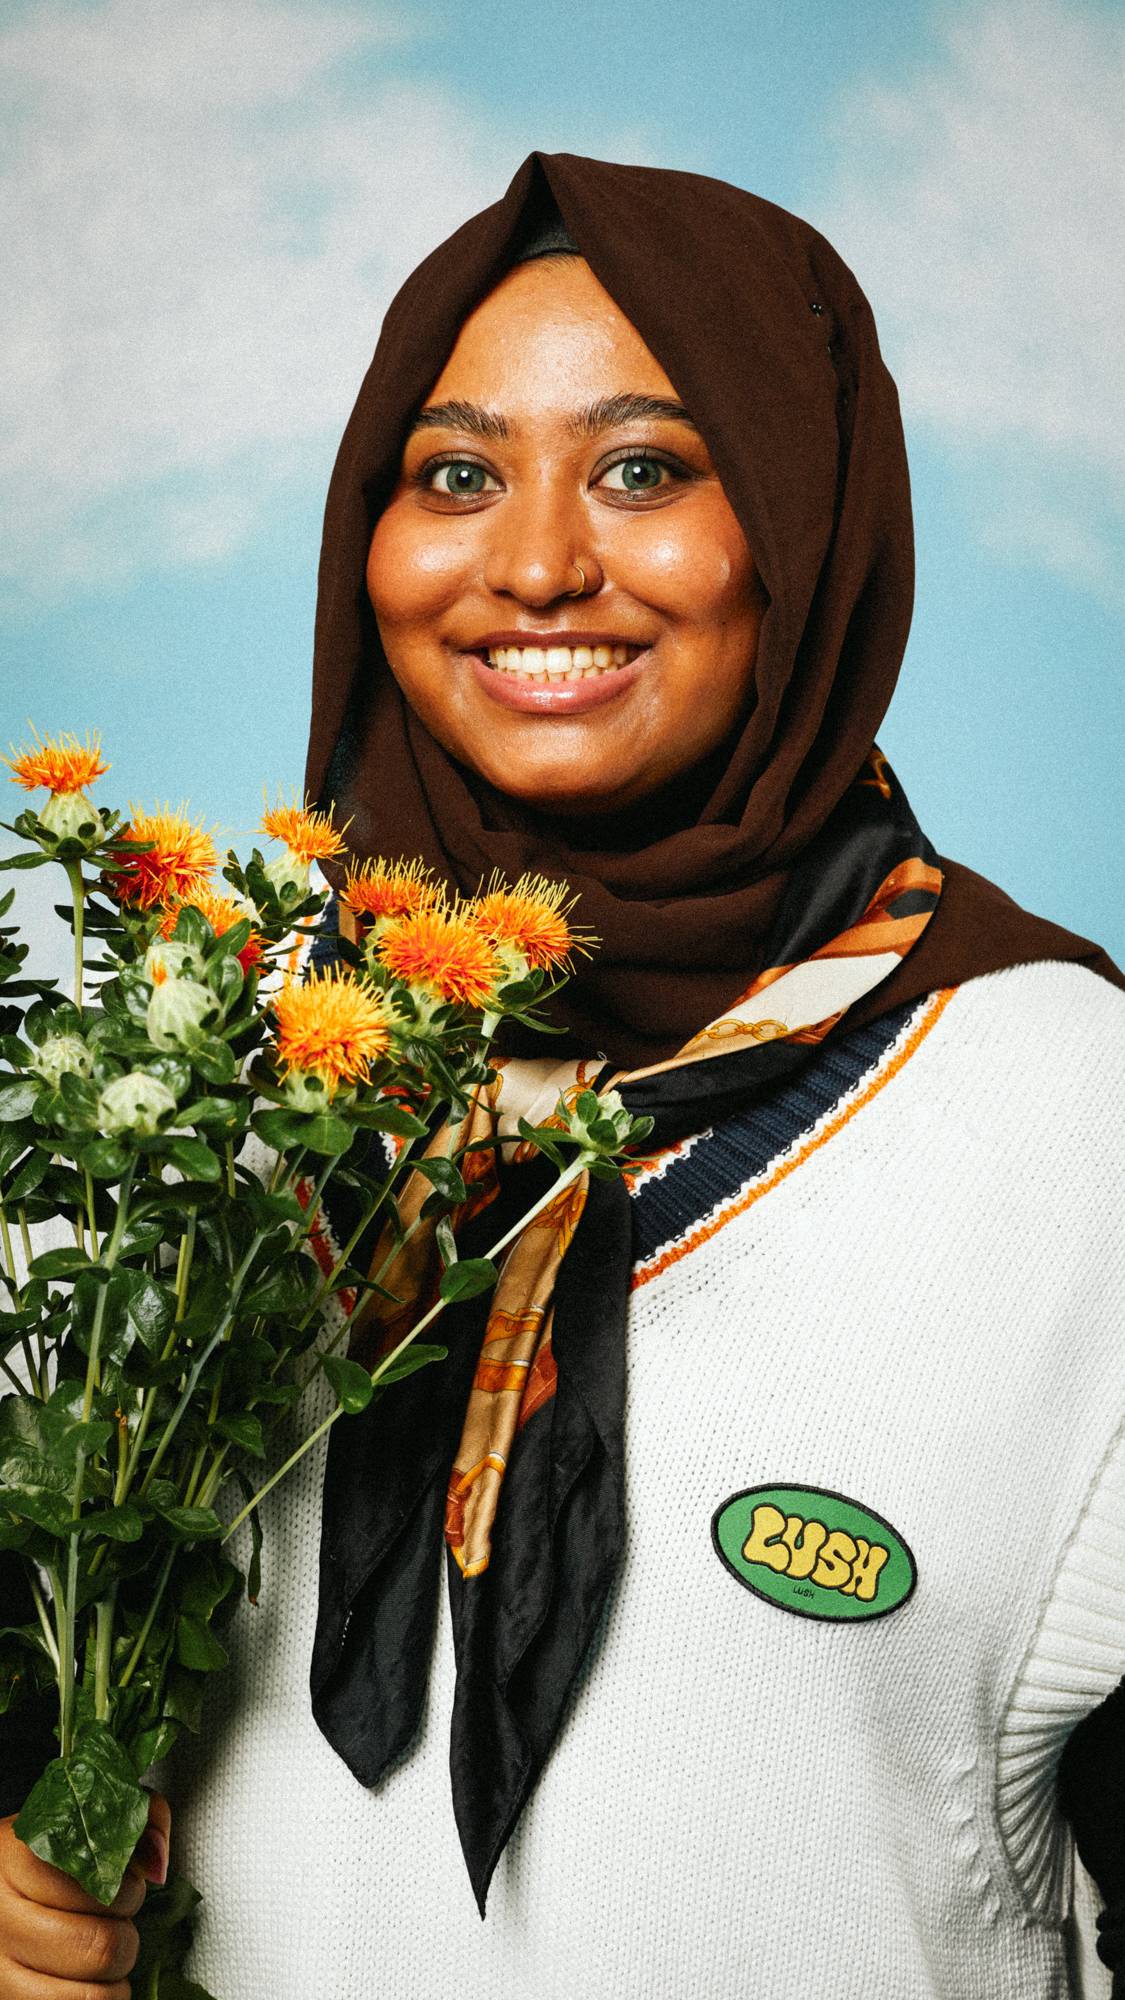 Model is wearing a hijab and white, knitted jumper with the Retro Bubble iron-on patch while they hold a bouquet of flowers. 